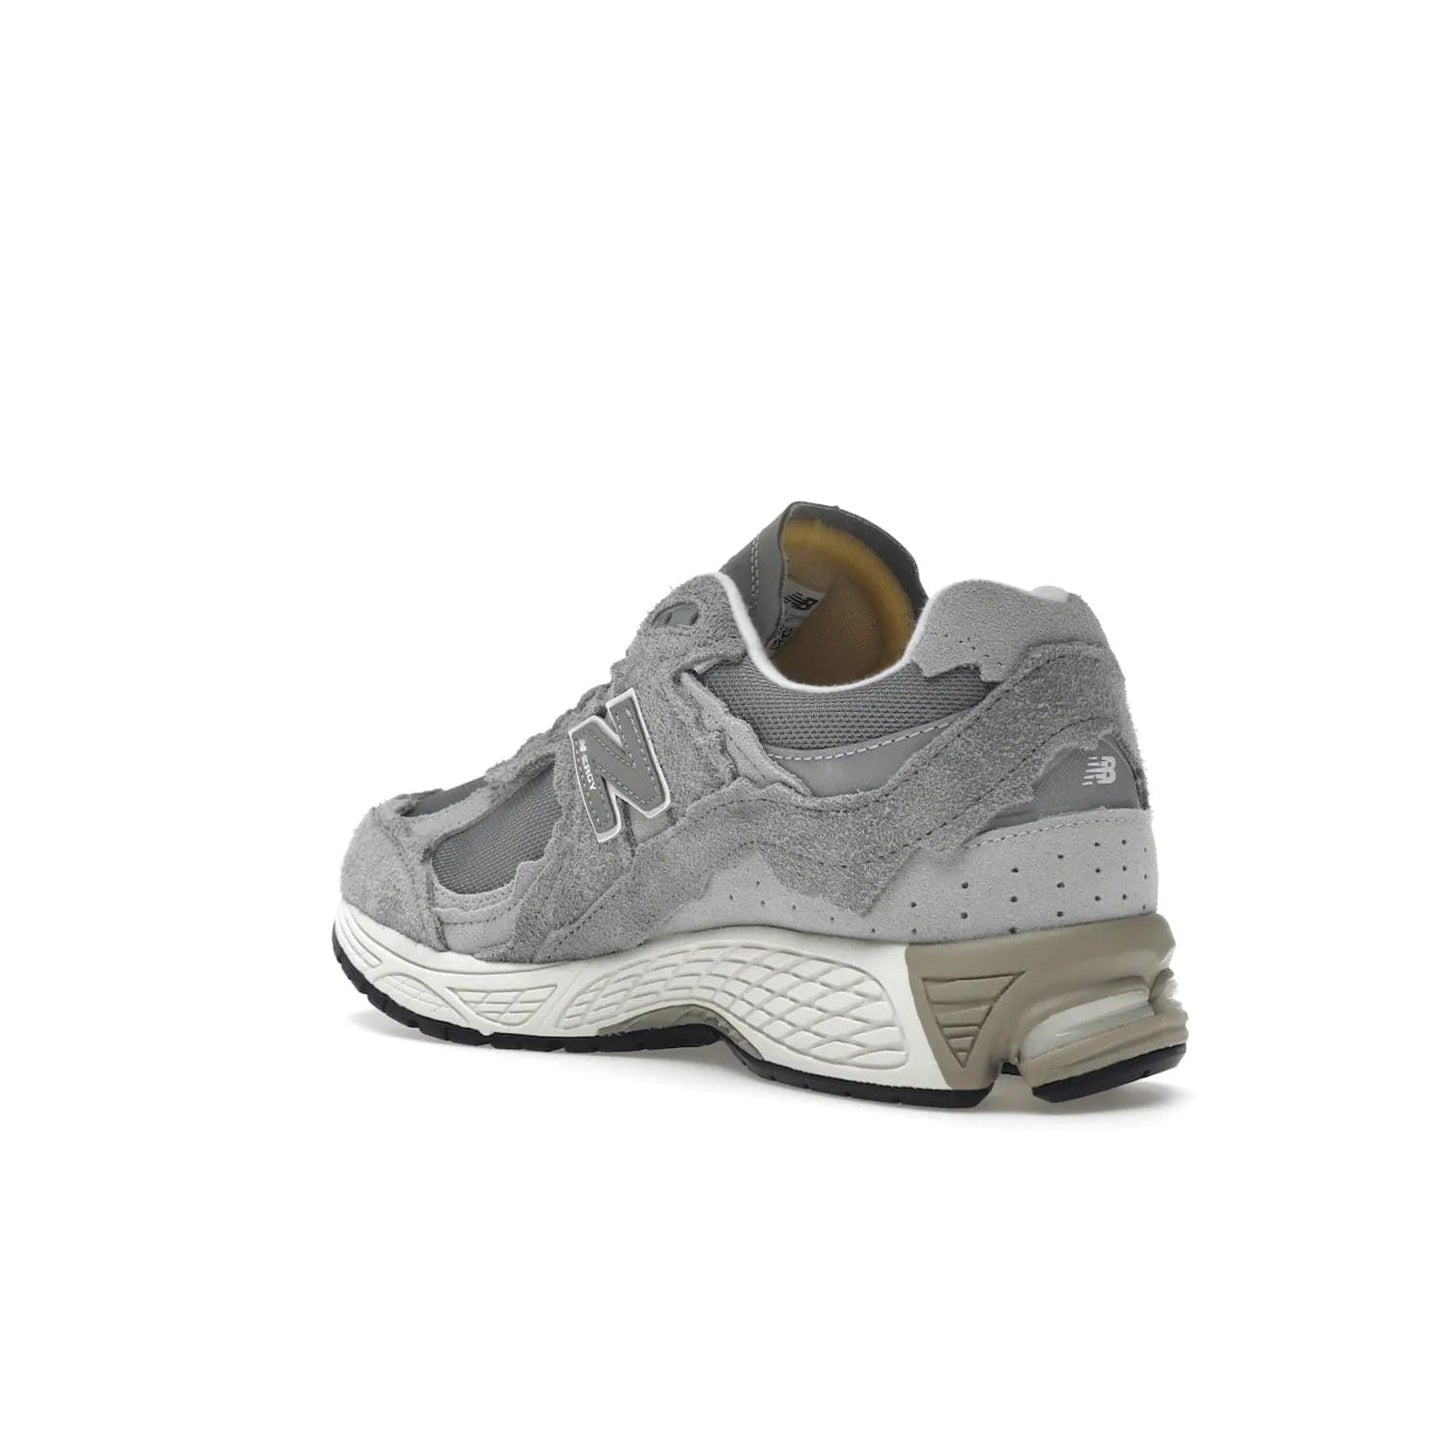 New Balance 2002R Protection Pack Grey - Image 24 - Only at www.BallersClubKickz.com - The New Balance 2002R Protection Pack Grey provides superior protection and all-day comfort. It features a blend of synthetic and mesh materials, foam midsole, rubber outsole, and a toe cap and heel counter. Show off the classic "N" logo and "2002R" lettering. Get a pair on February 14, 2023 for protection and style.